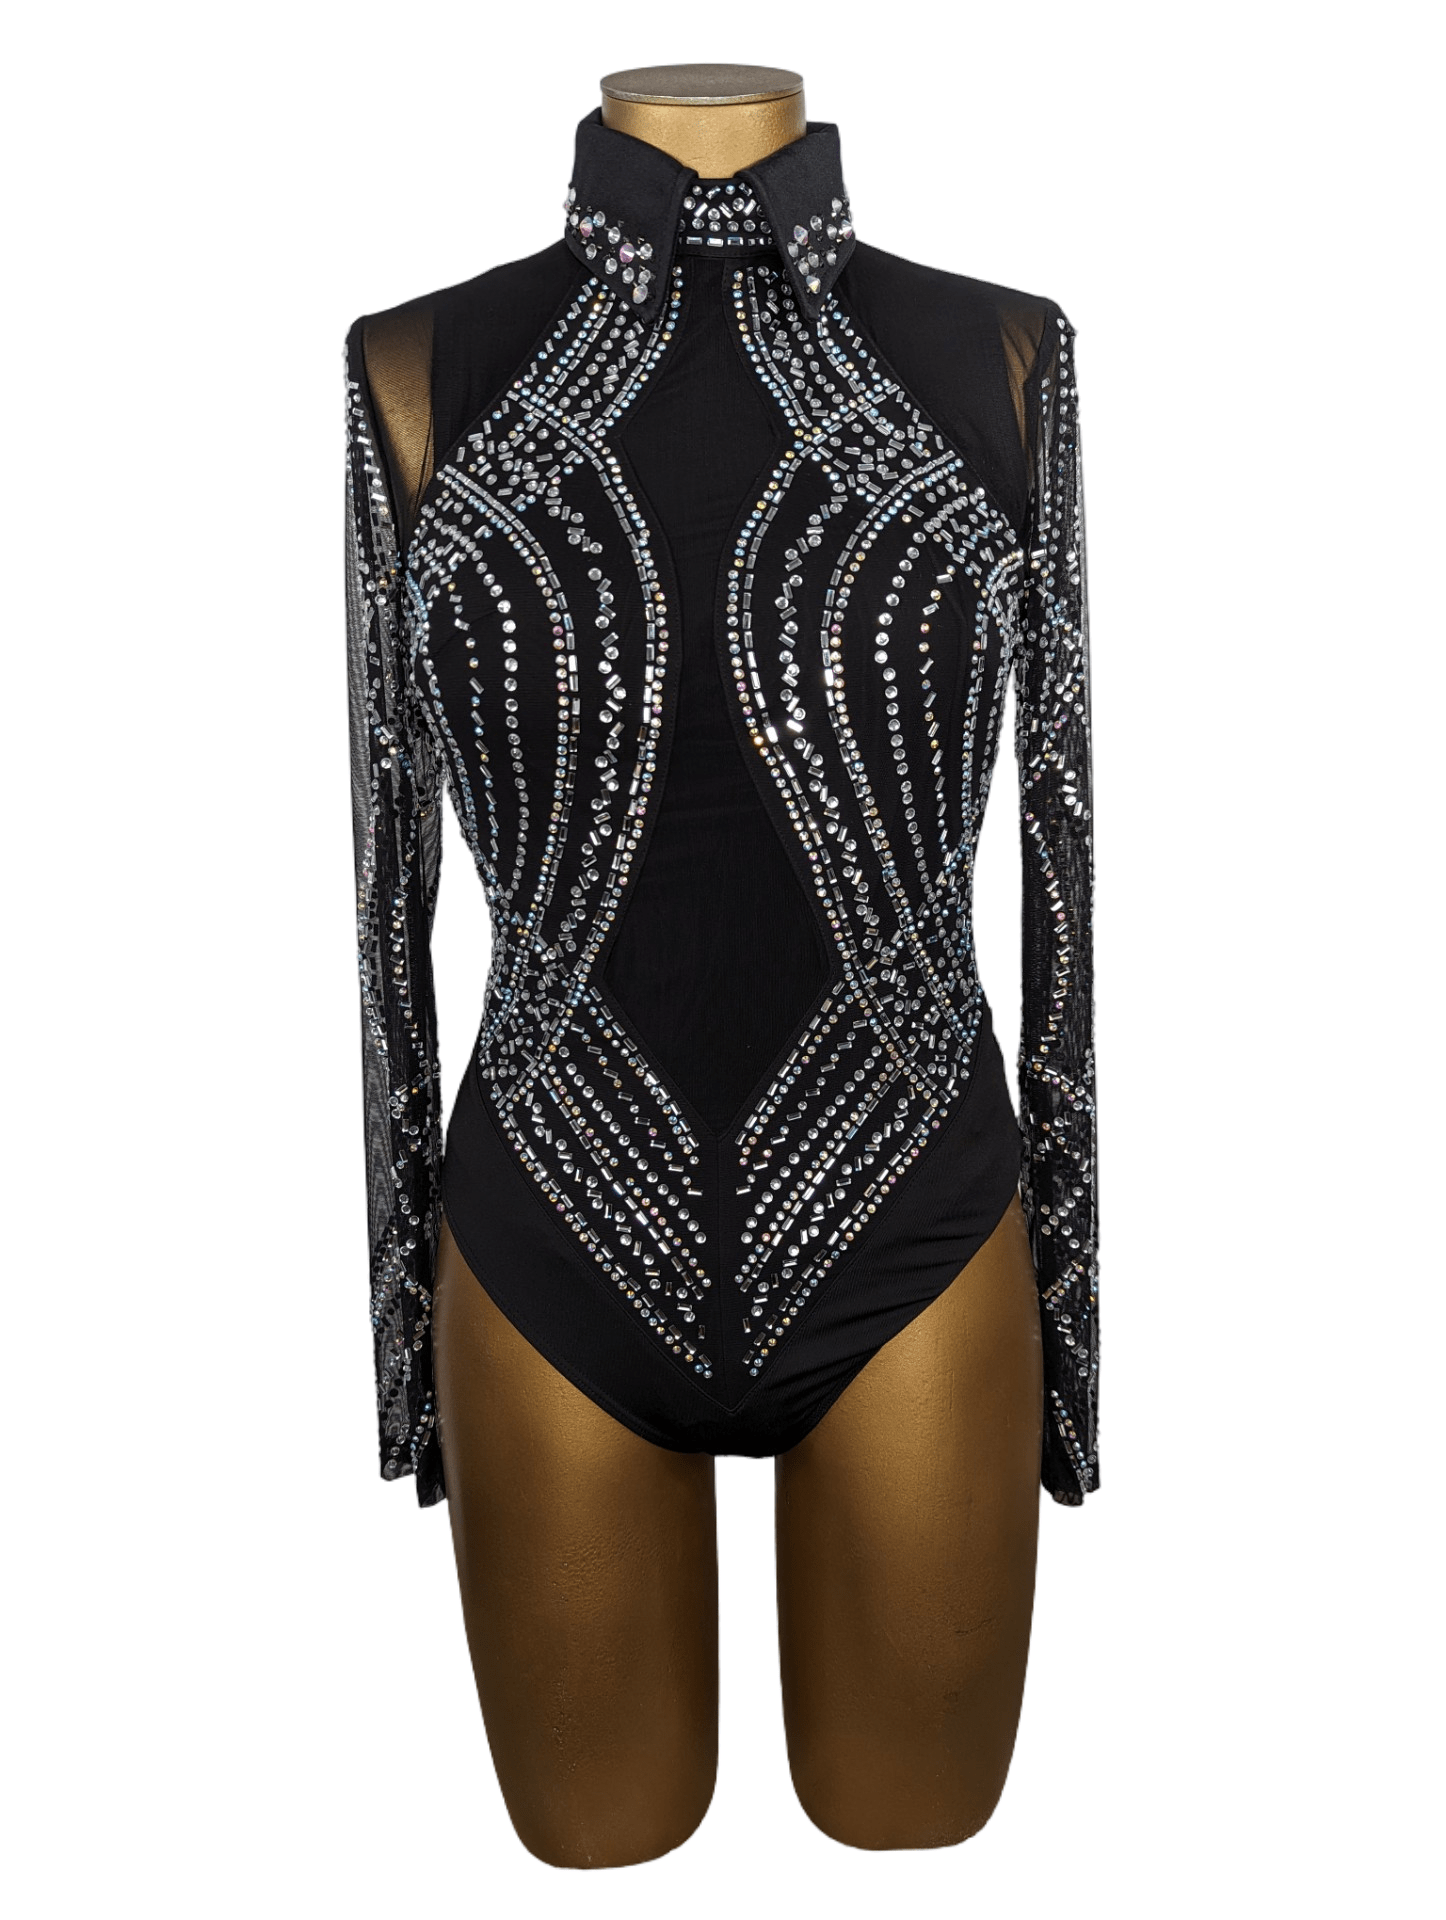 sparkle-ridge-womens-western-wear-affordable-show-clothes-horse-shirts-with-bling-rodeo-bodysuit-black-aces-front.png